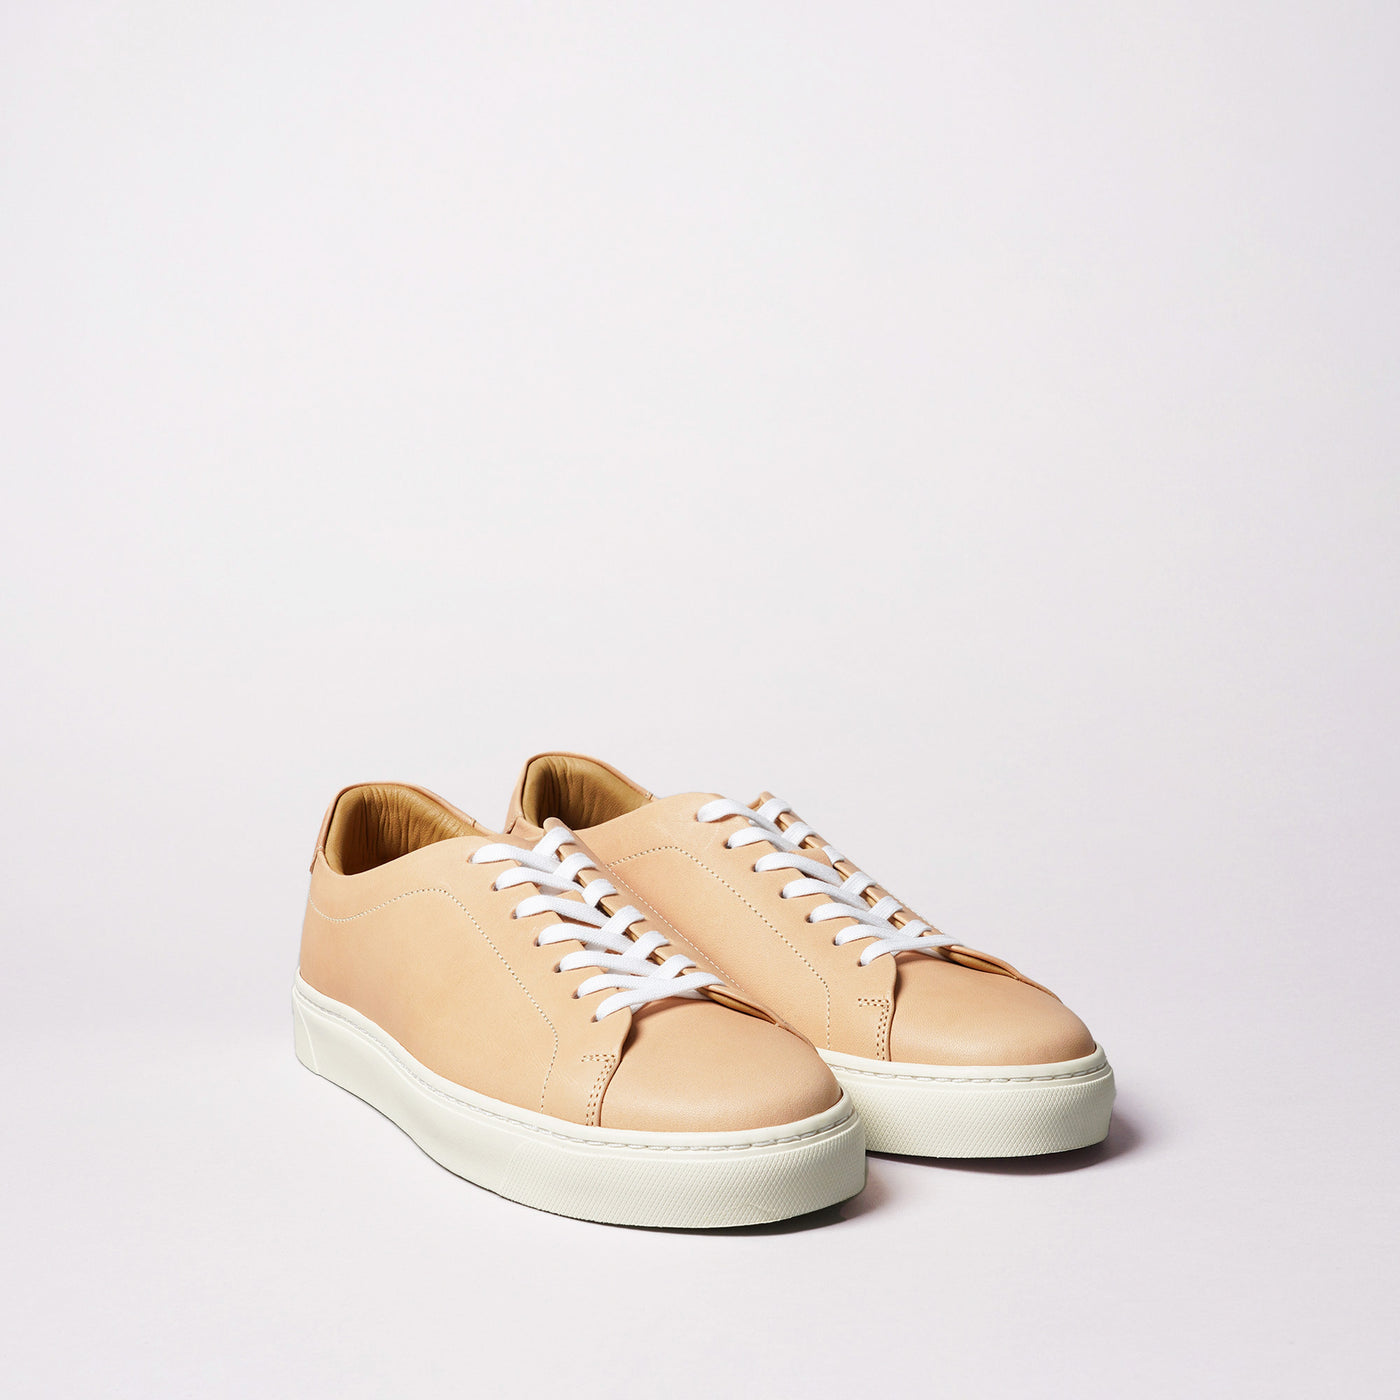 <TOSS> Chester Chester lace-up leather sneakers, Tanned Tochigi leather /  brown